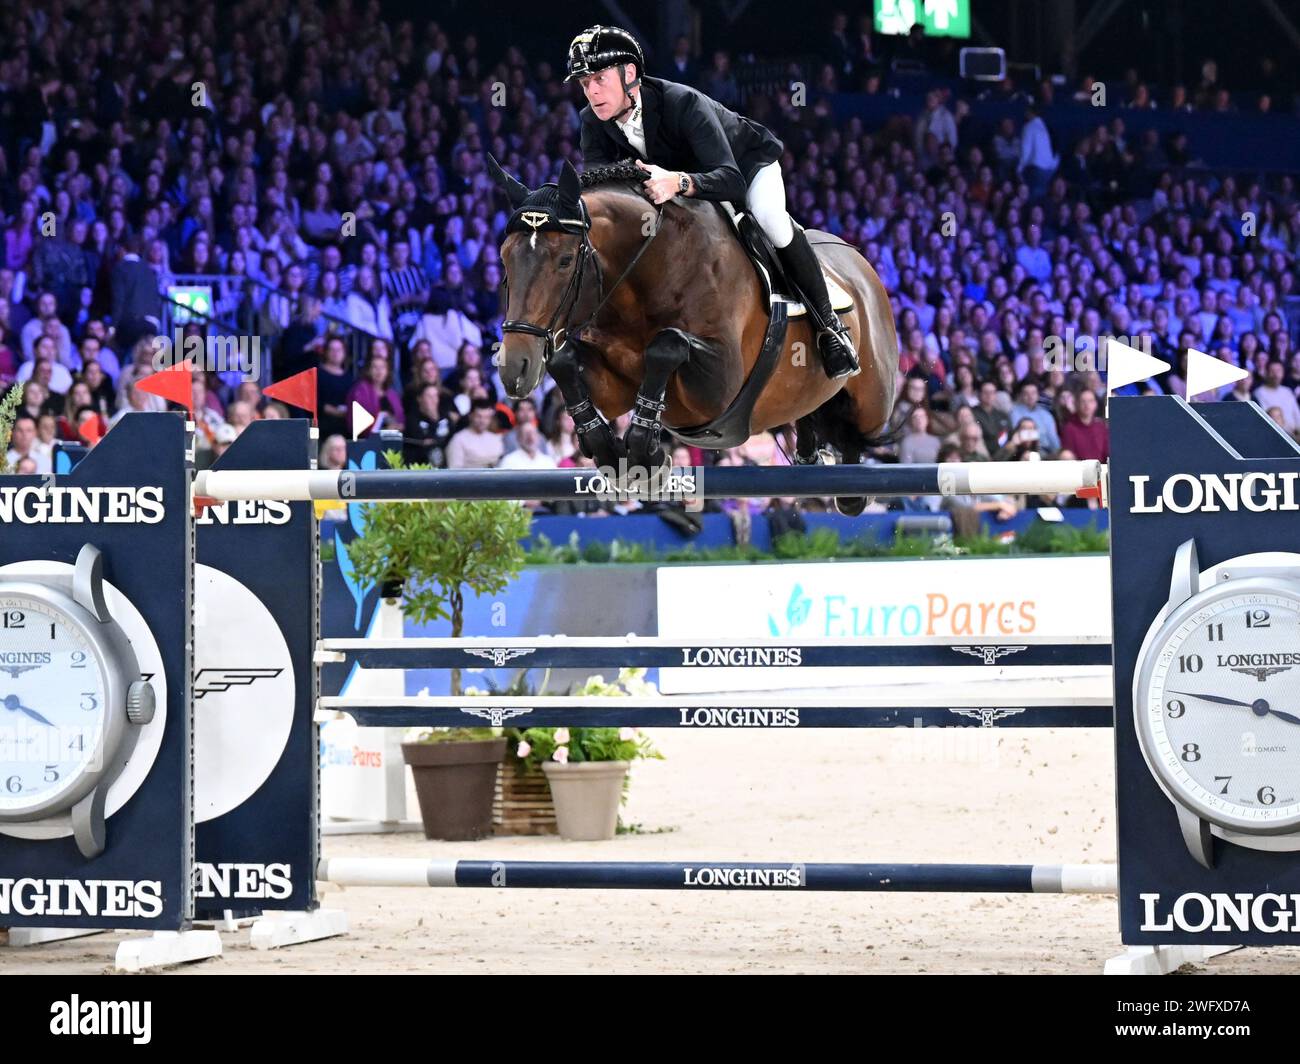 AMSTERDAM - Marcus Ehning with Stargold during the Longines FEI Jumping World Cup at the Jumping Amsterdam 2024 tournament at the RAI on January 28, 2024 in Amsterdam, the Netherlands. ANP | Hollandse Hoogte | GERRIT VAN COLOGNE Stock Photo